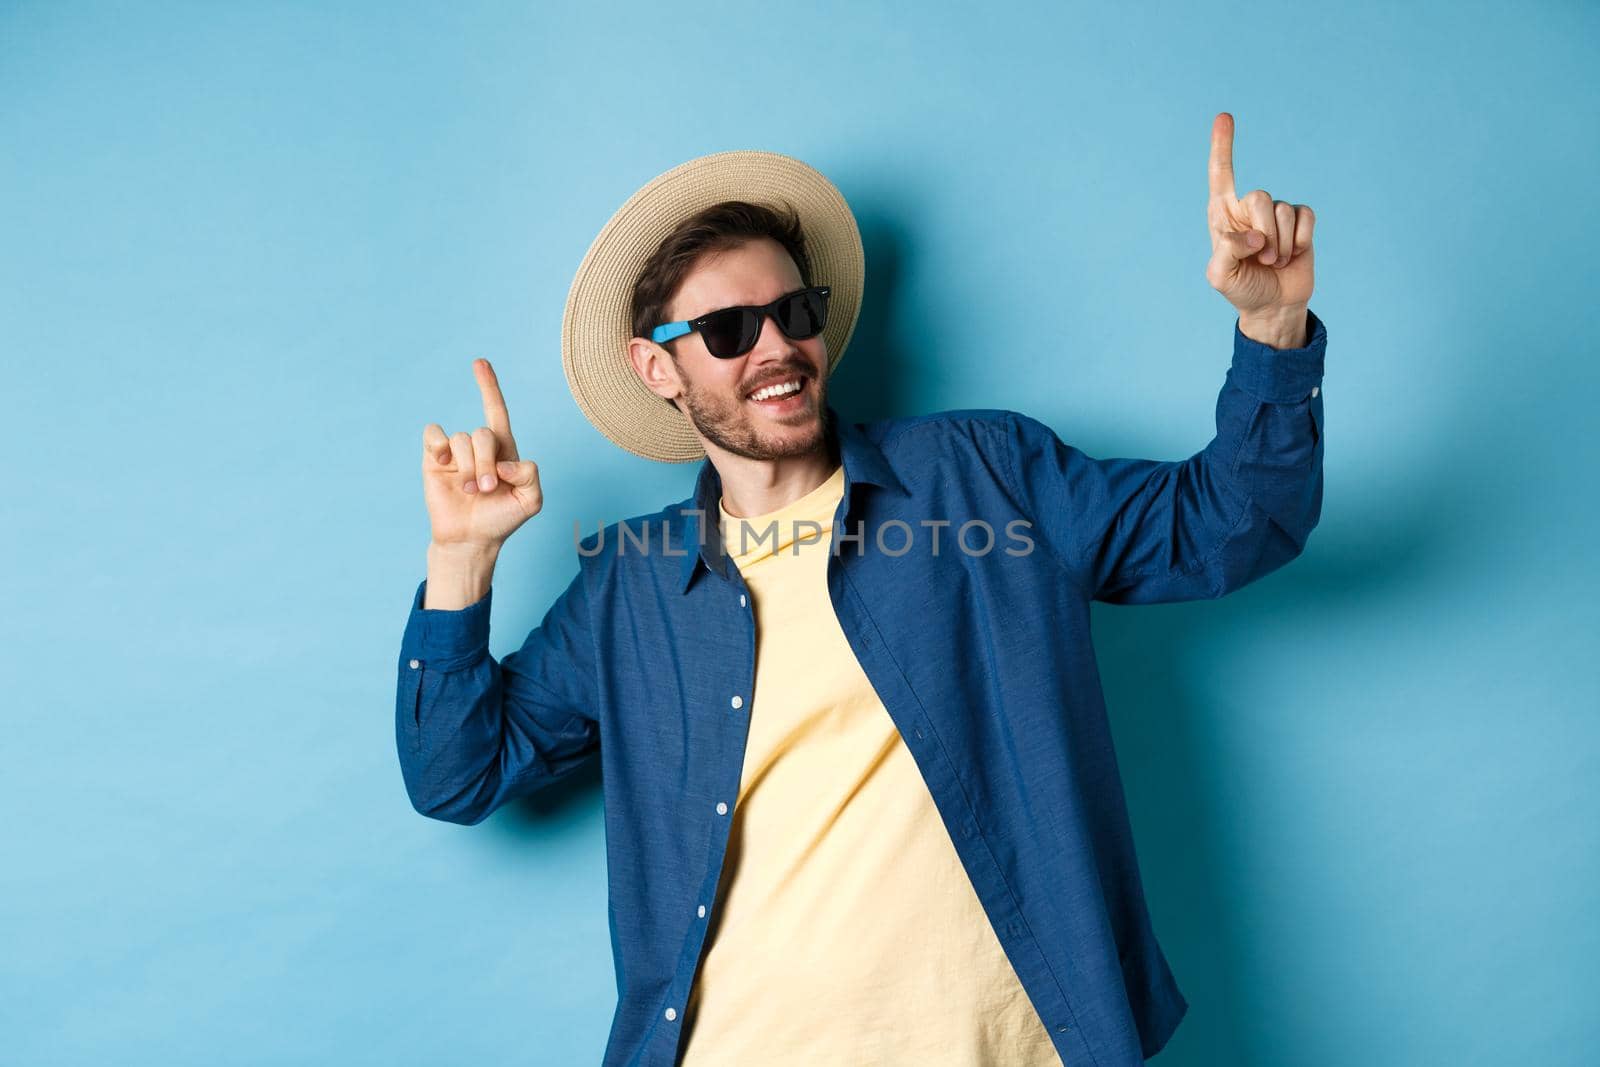 Funny tourist dancing on vacation, pointing fingers up, wearing summer hat and sunglasses, blue background.